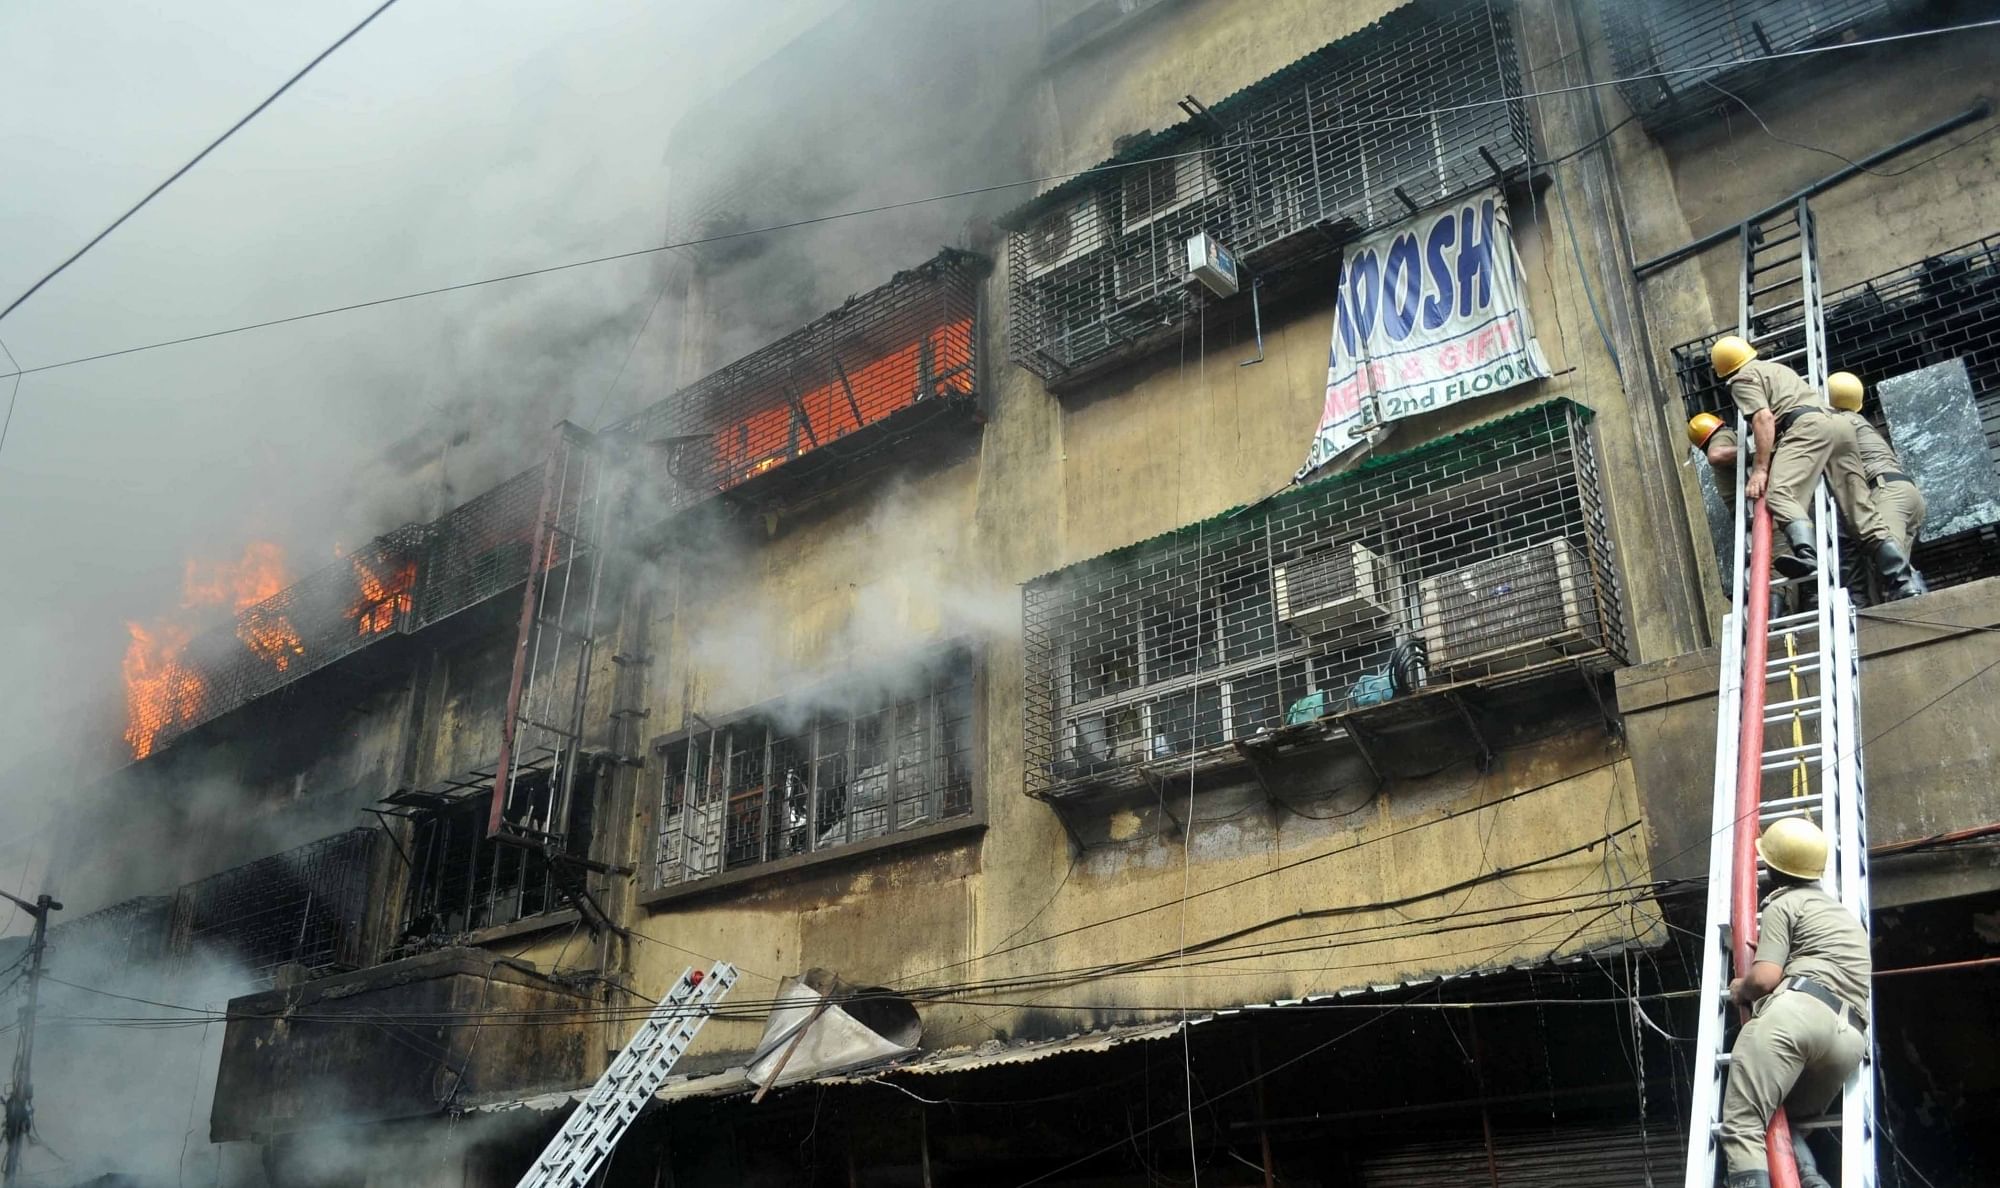 Fire fighters busy dousing the massive fire at Bagri Market, a wholesale market in Kolkata.